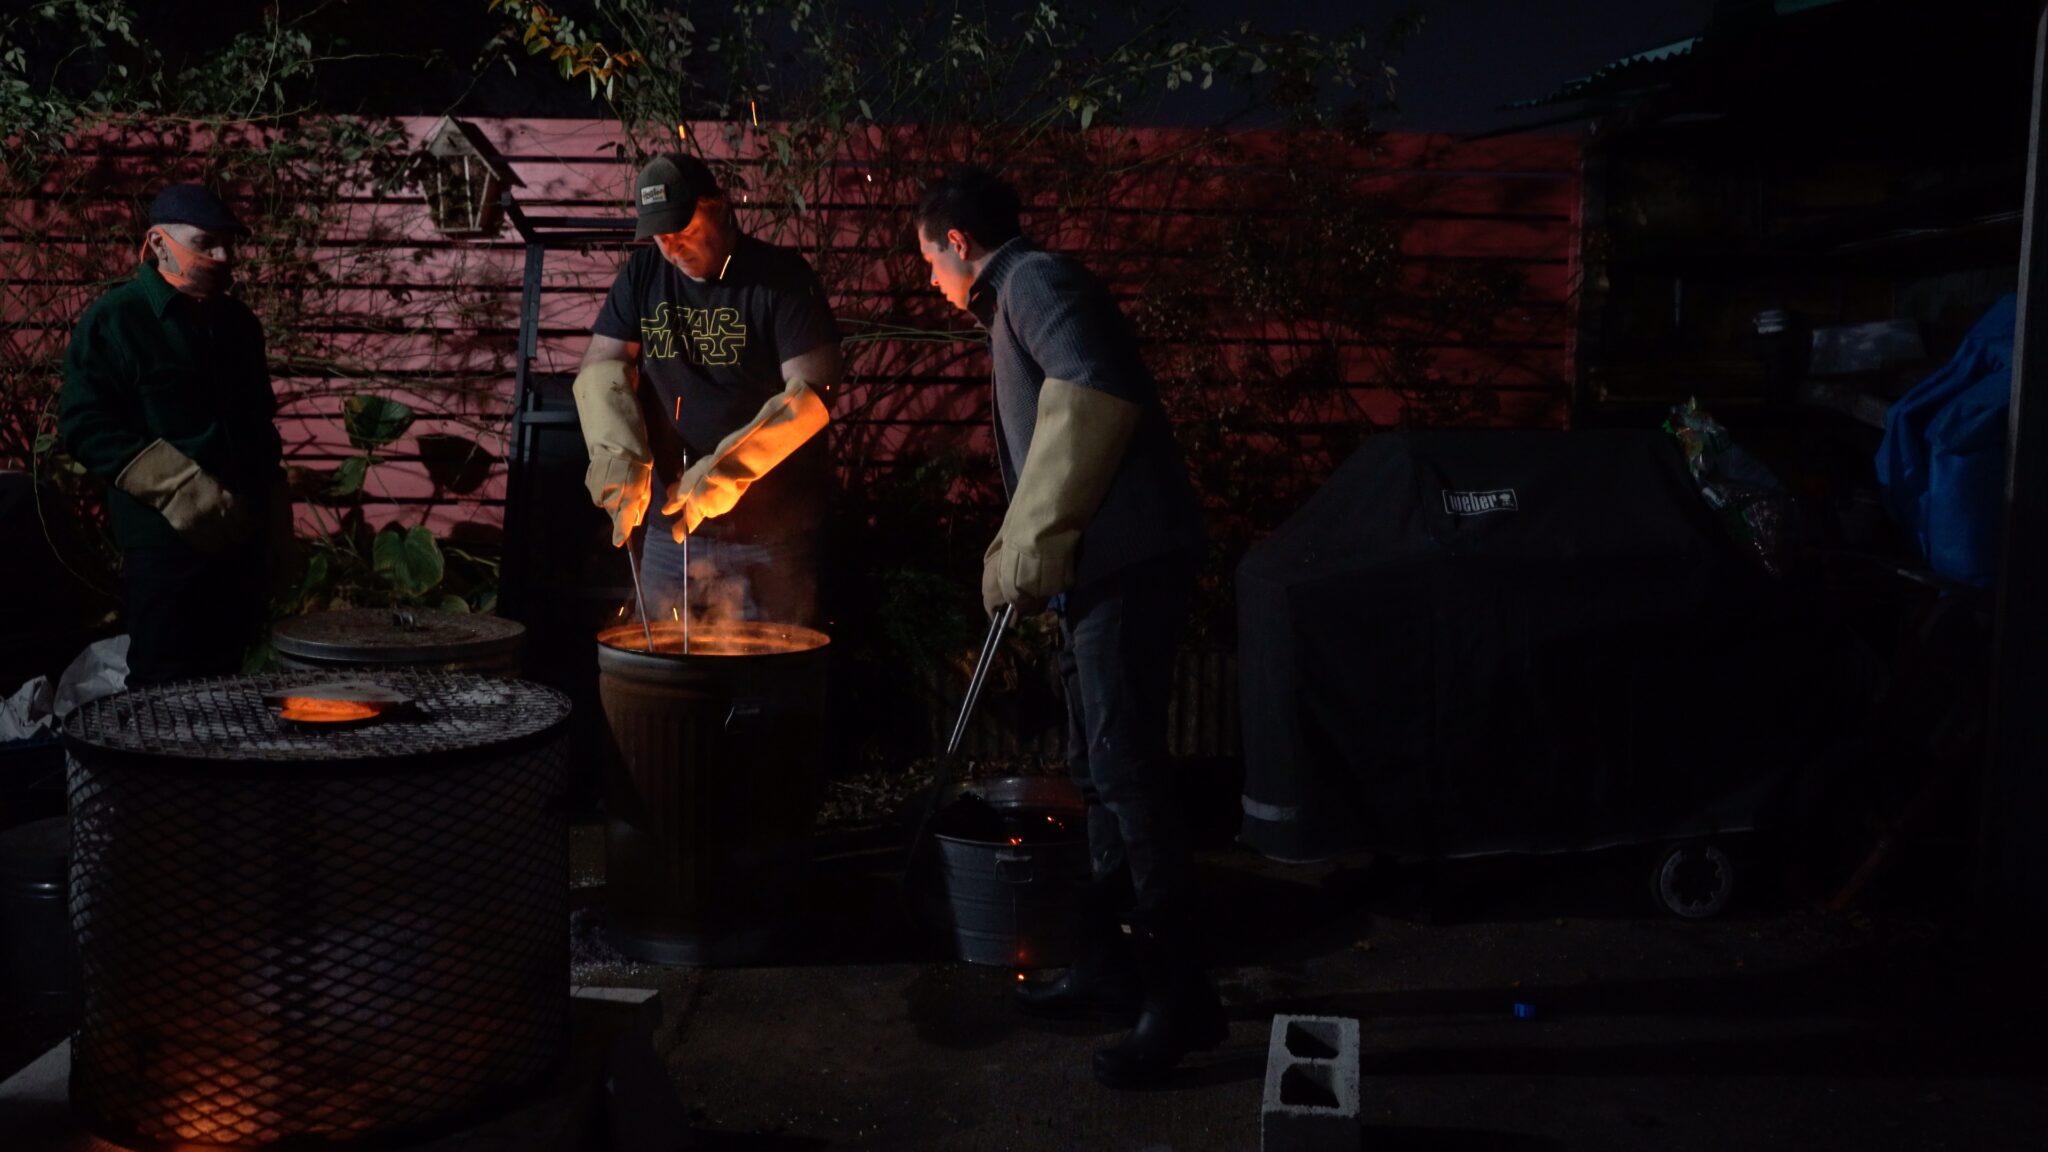 A photograph of Andrew Cornell Robinson (center) working with artists Jeffrey Goldstein (left) and Alonso Cartú (right) firing a western-style Raku Kiln.